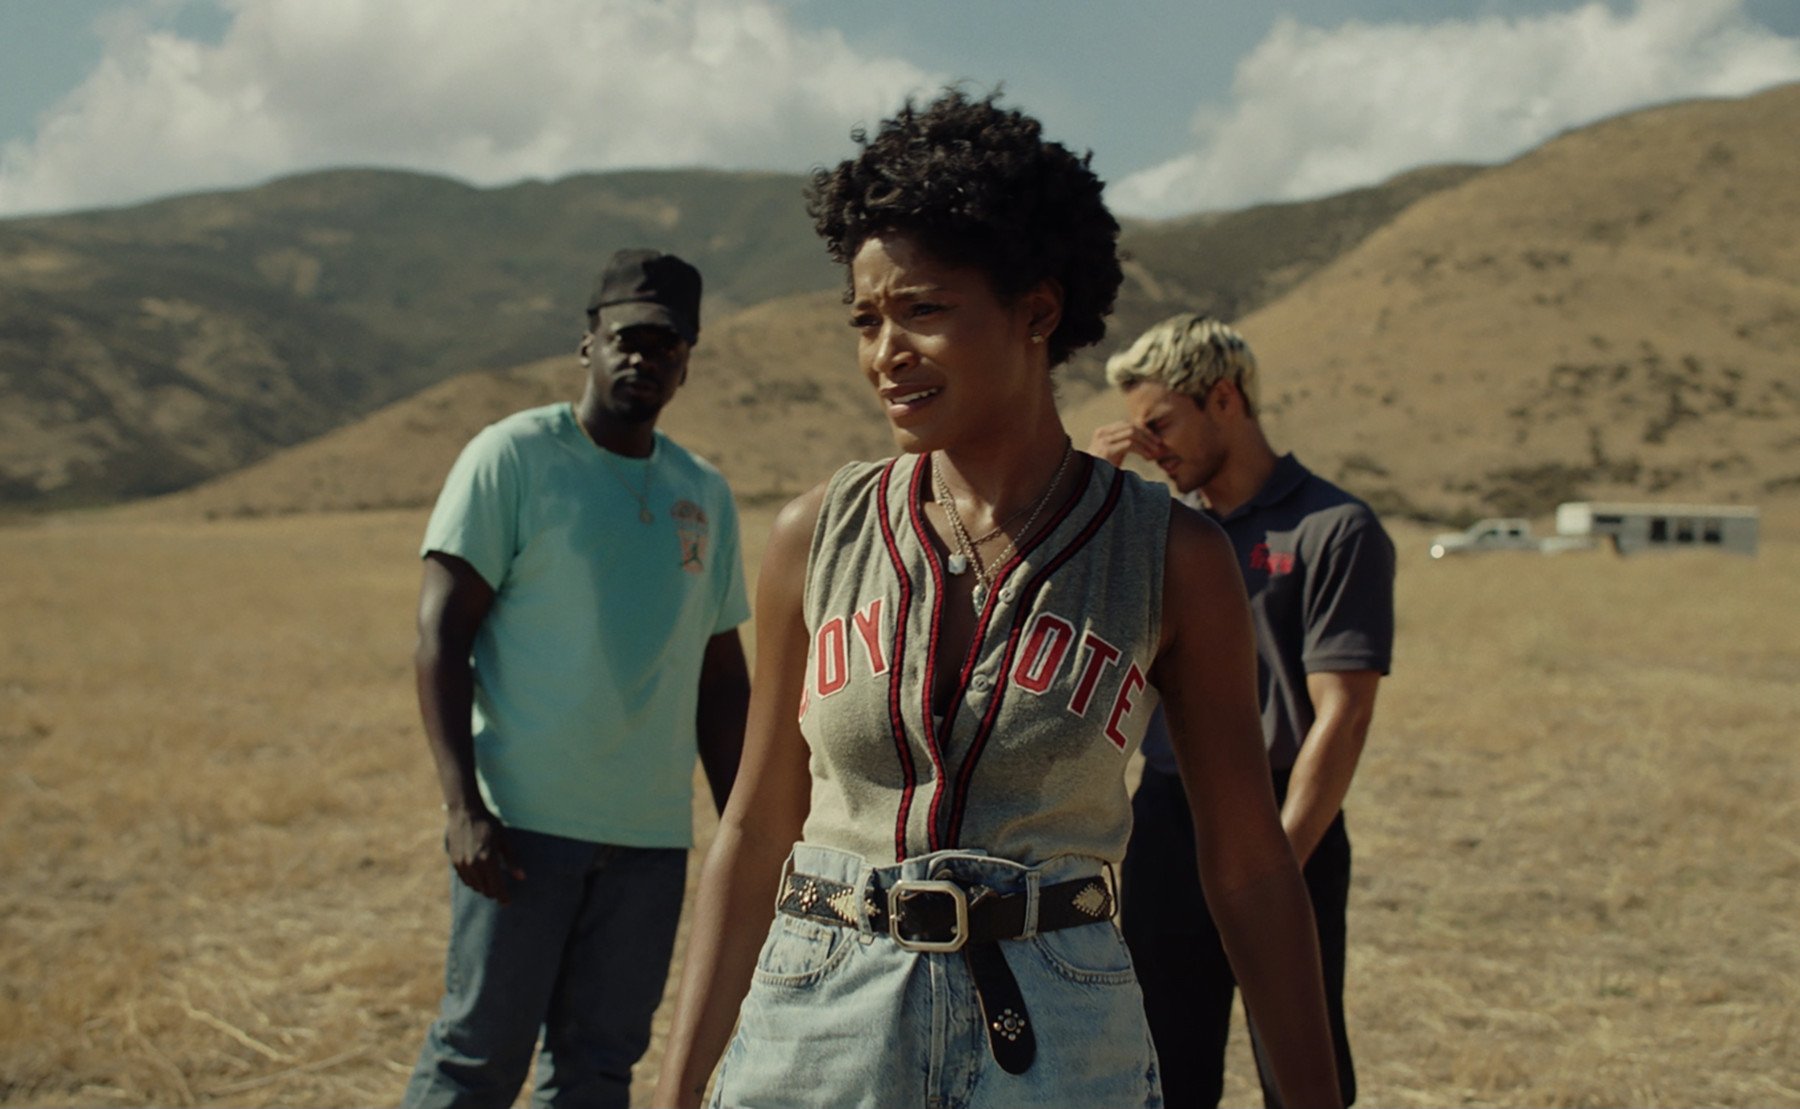 Daniel Kaluuya as OJ Haywood, Keke Palmer as Emerald Haywood, and Brandon Perea as Angel Torres in 'Nope,' which will be available to stream in November 2022. The characters are standing in the middle of a sandy landscape.